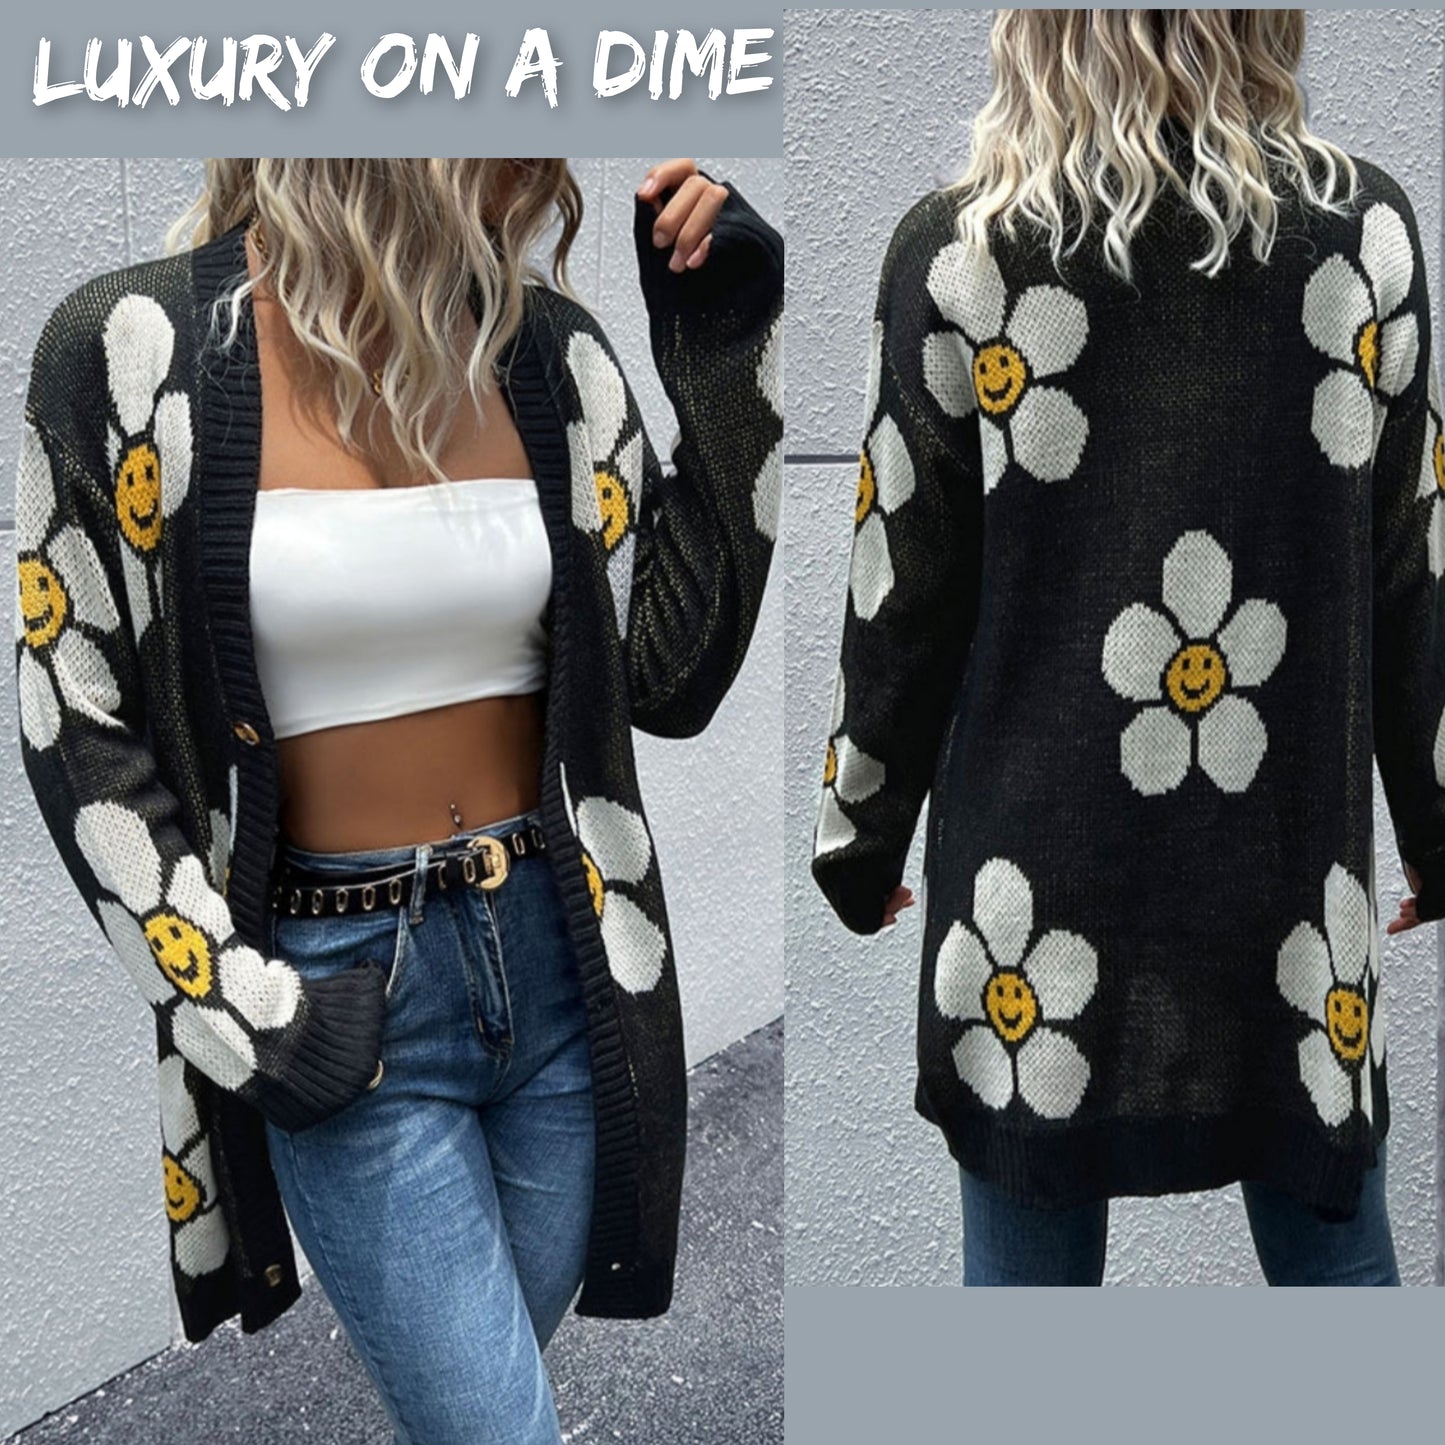 Daisy Smiley Face Button Down Longline Knit Cardigan